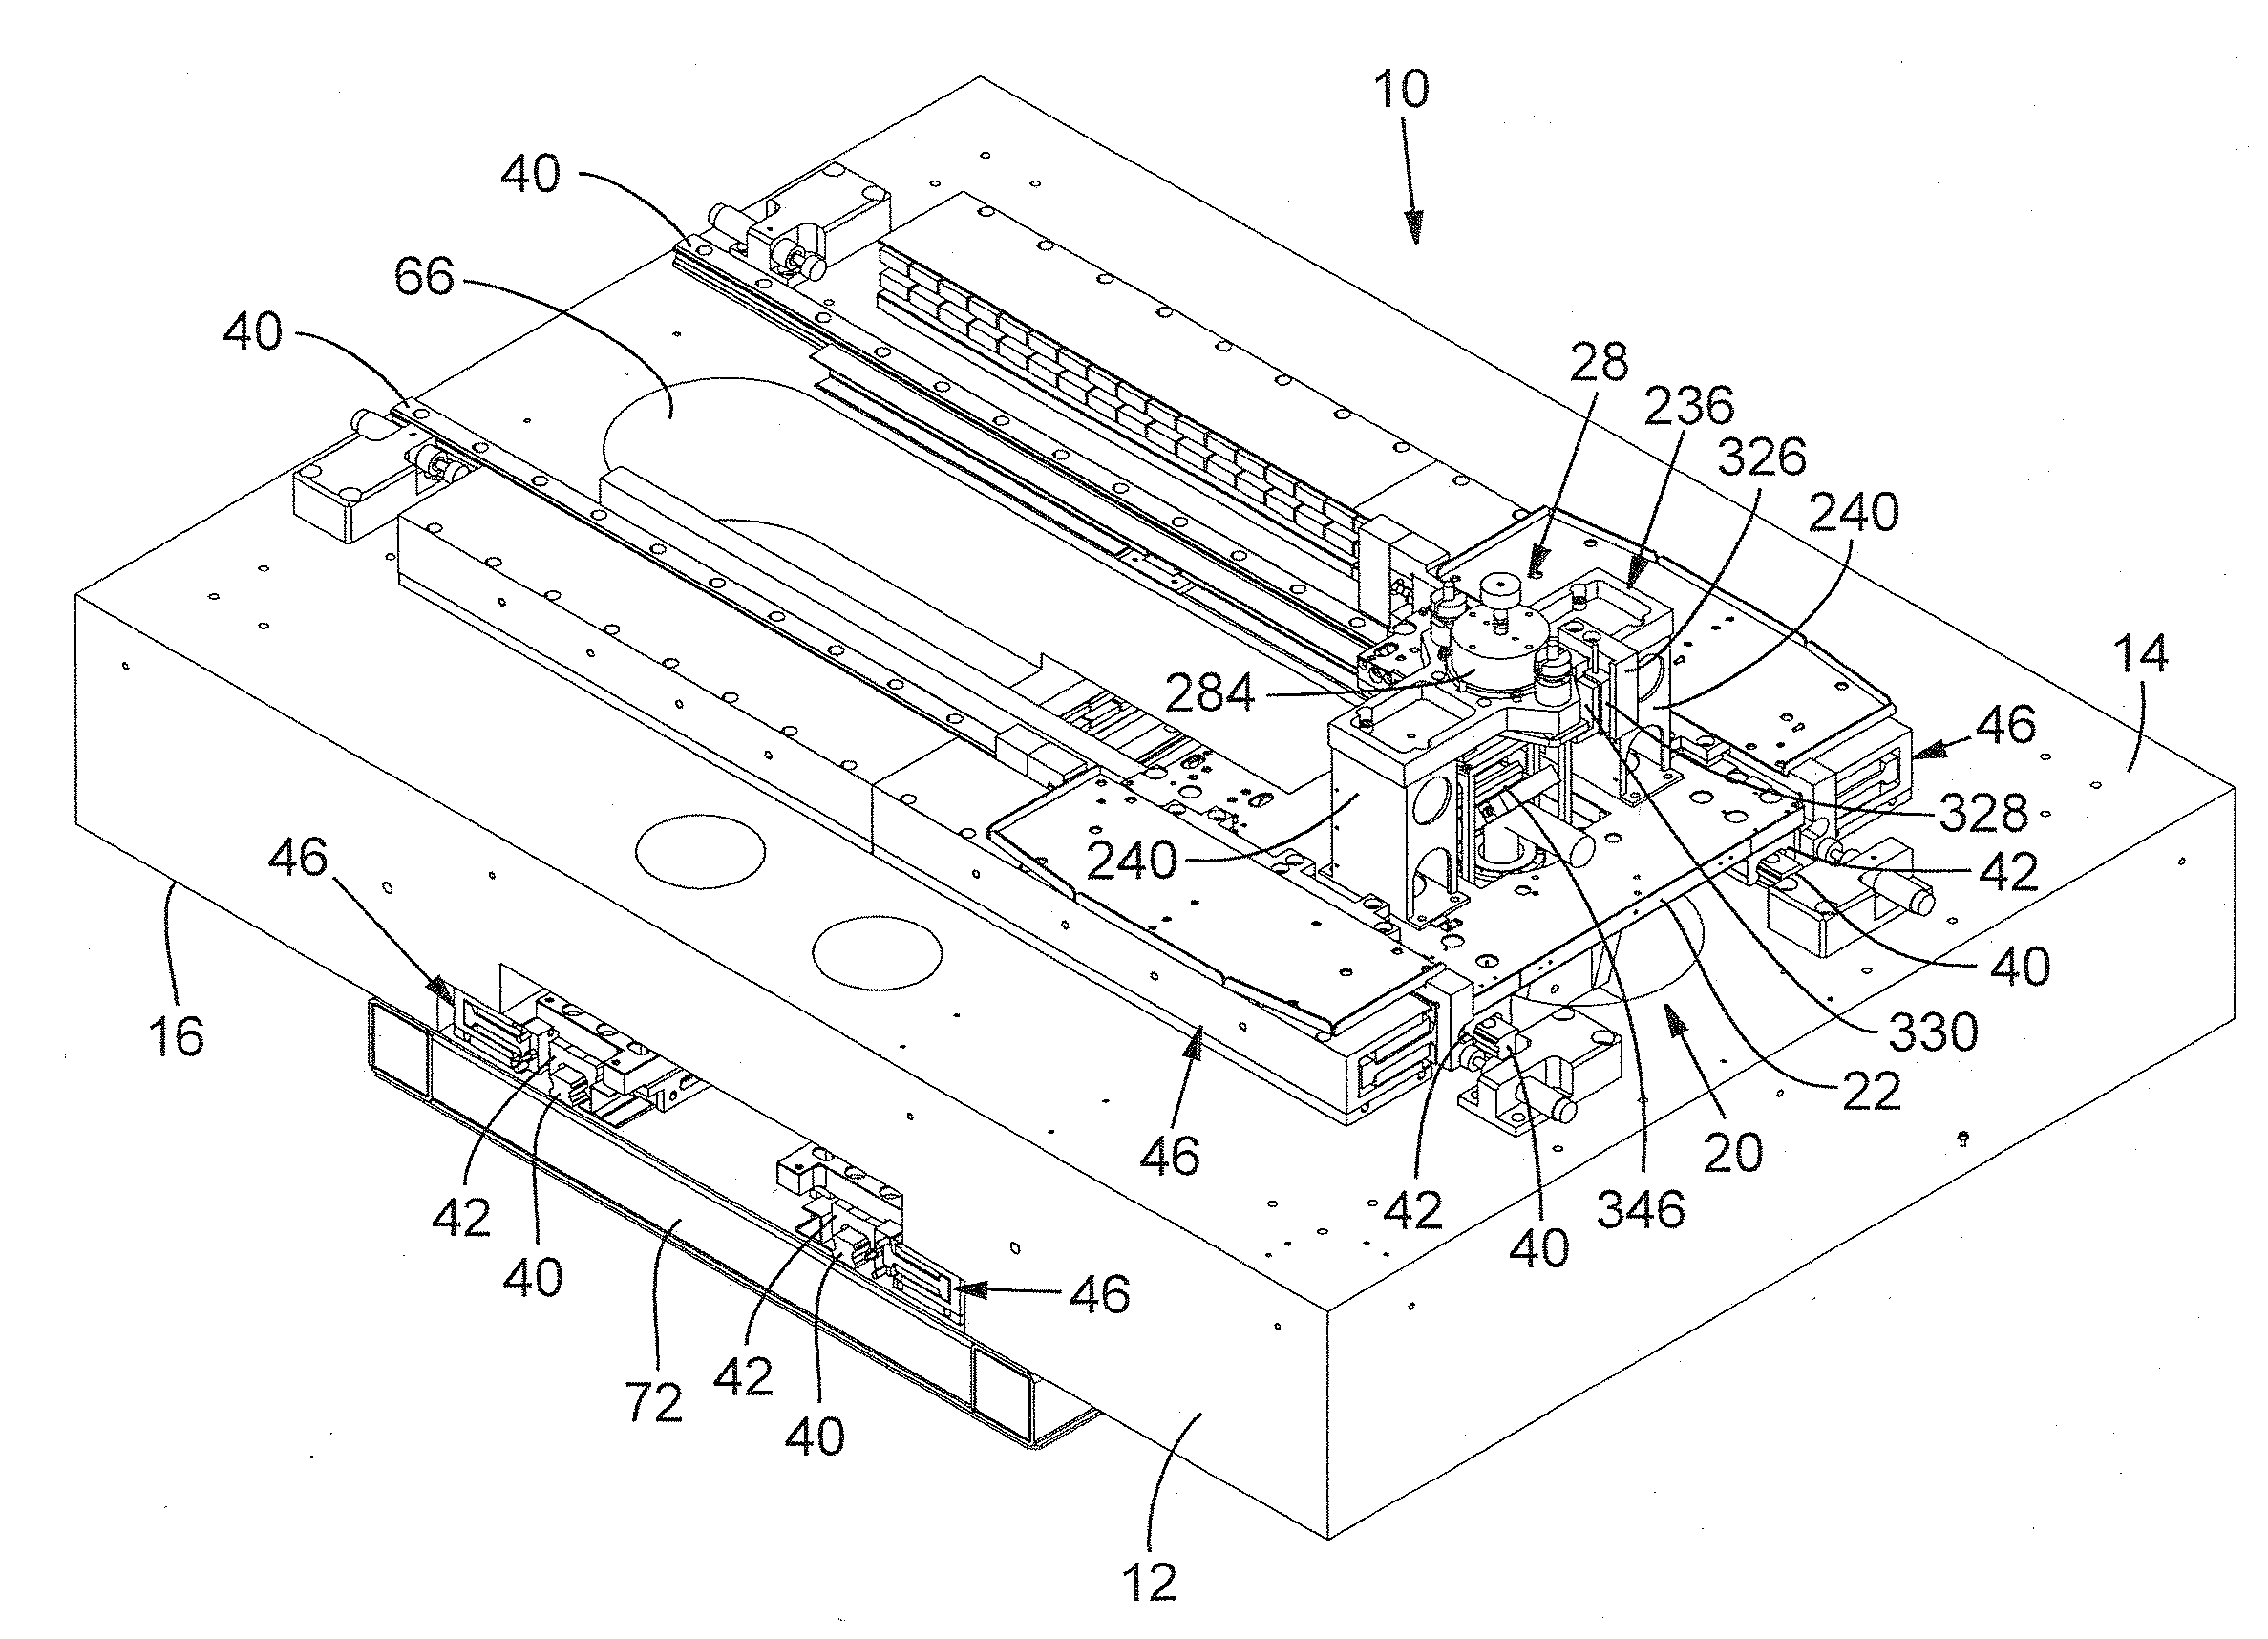 Decoupled, multiple stage positioning system